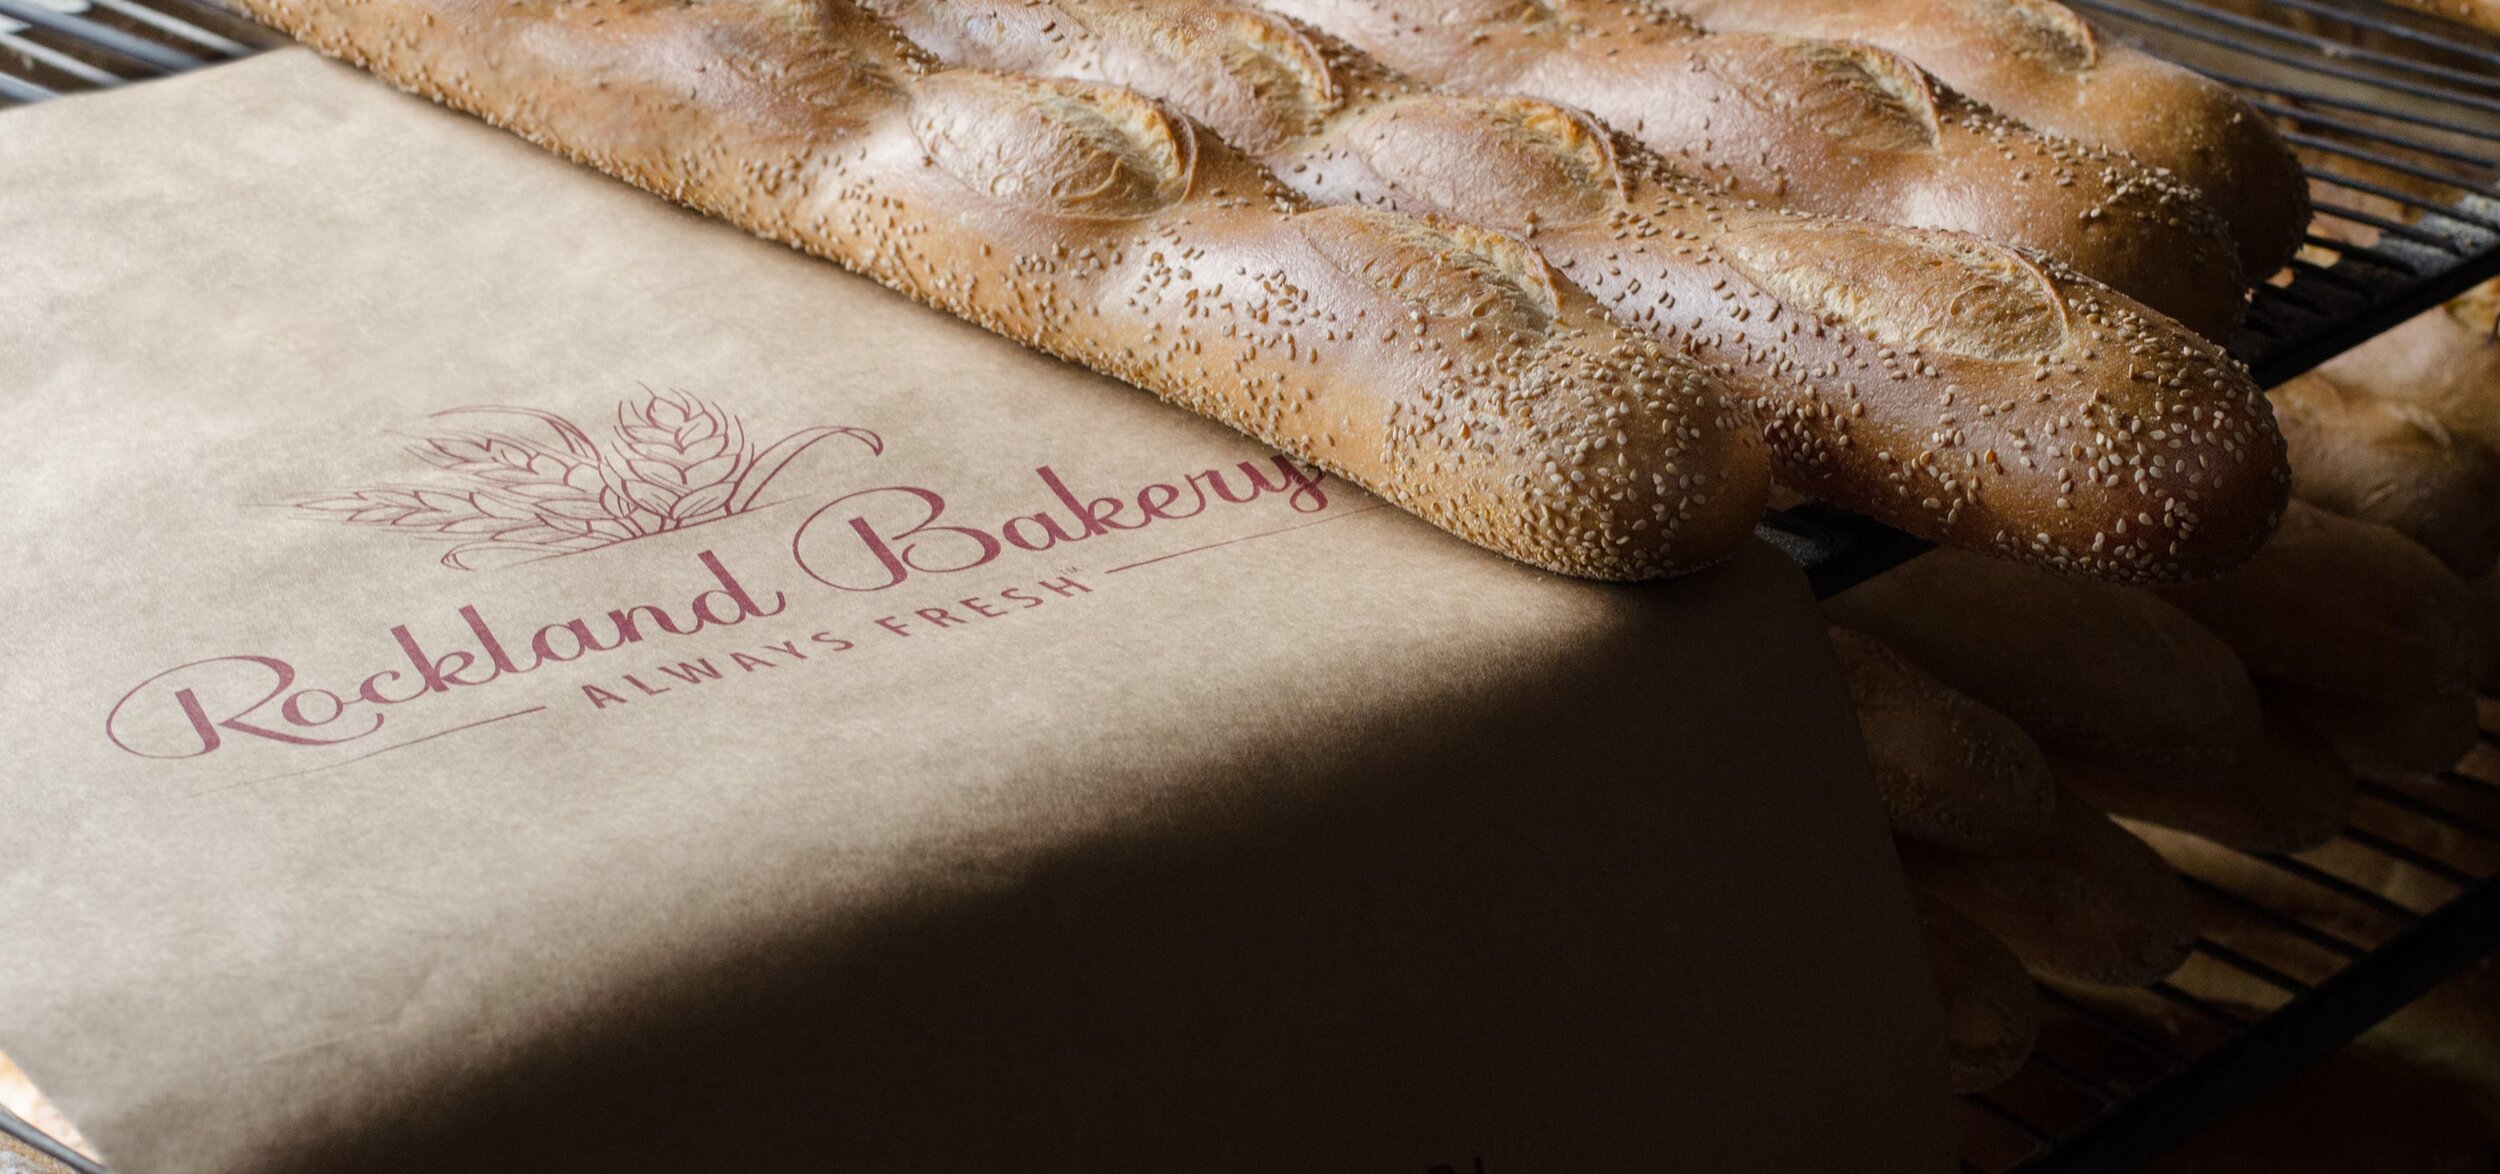 The Rockland Bakery